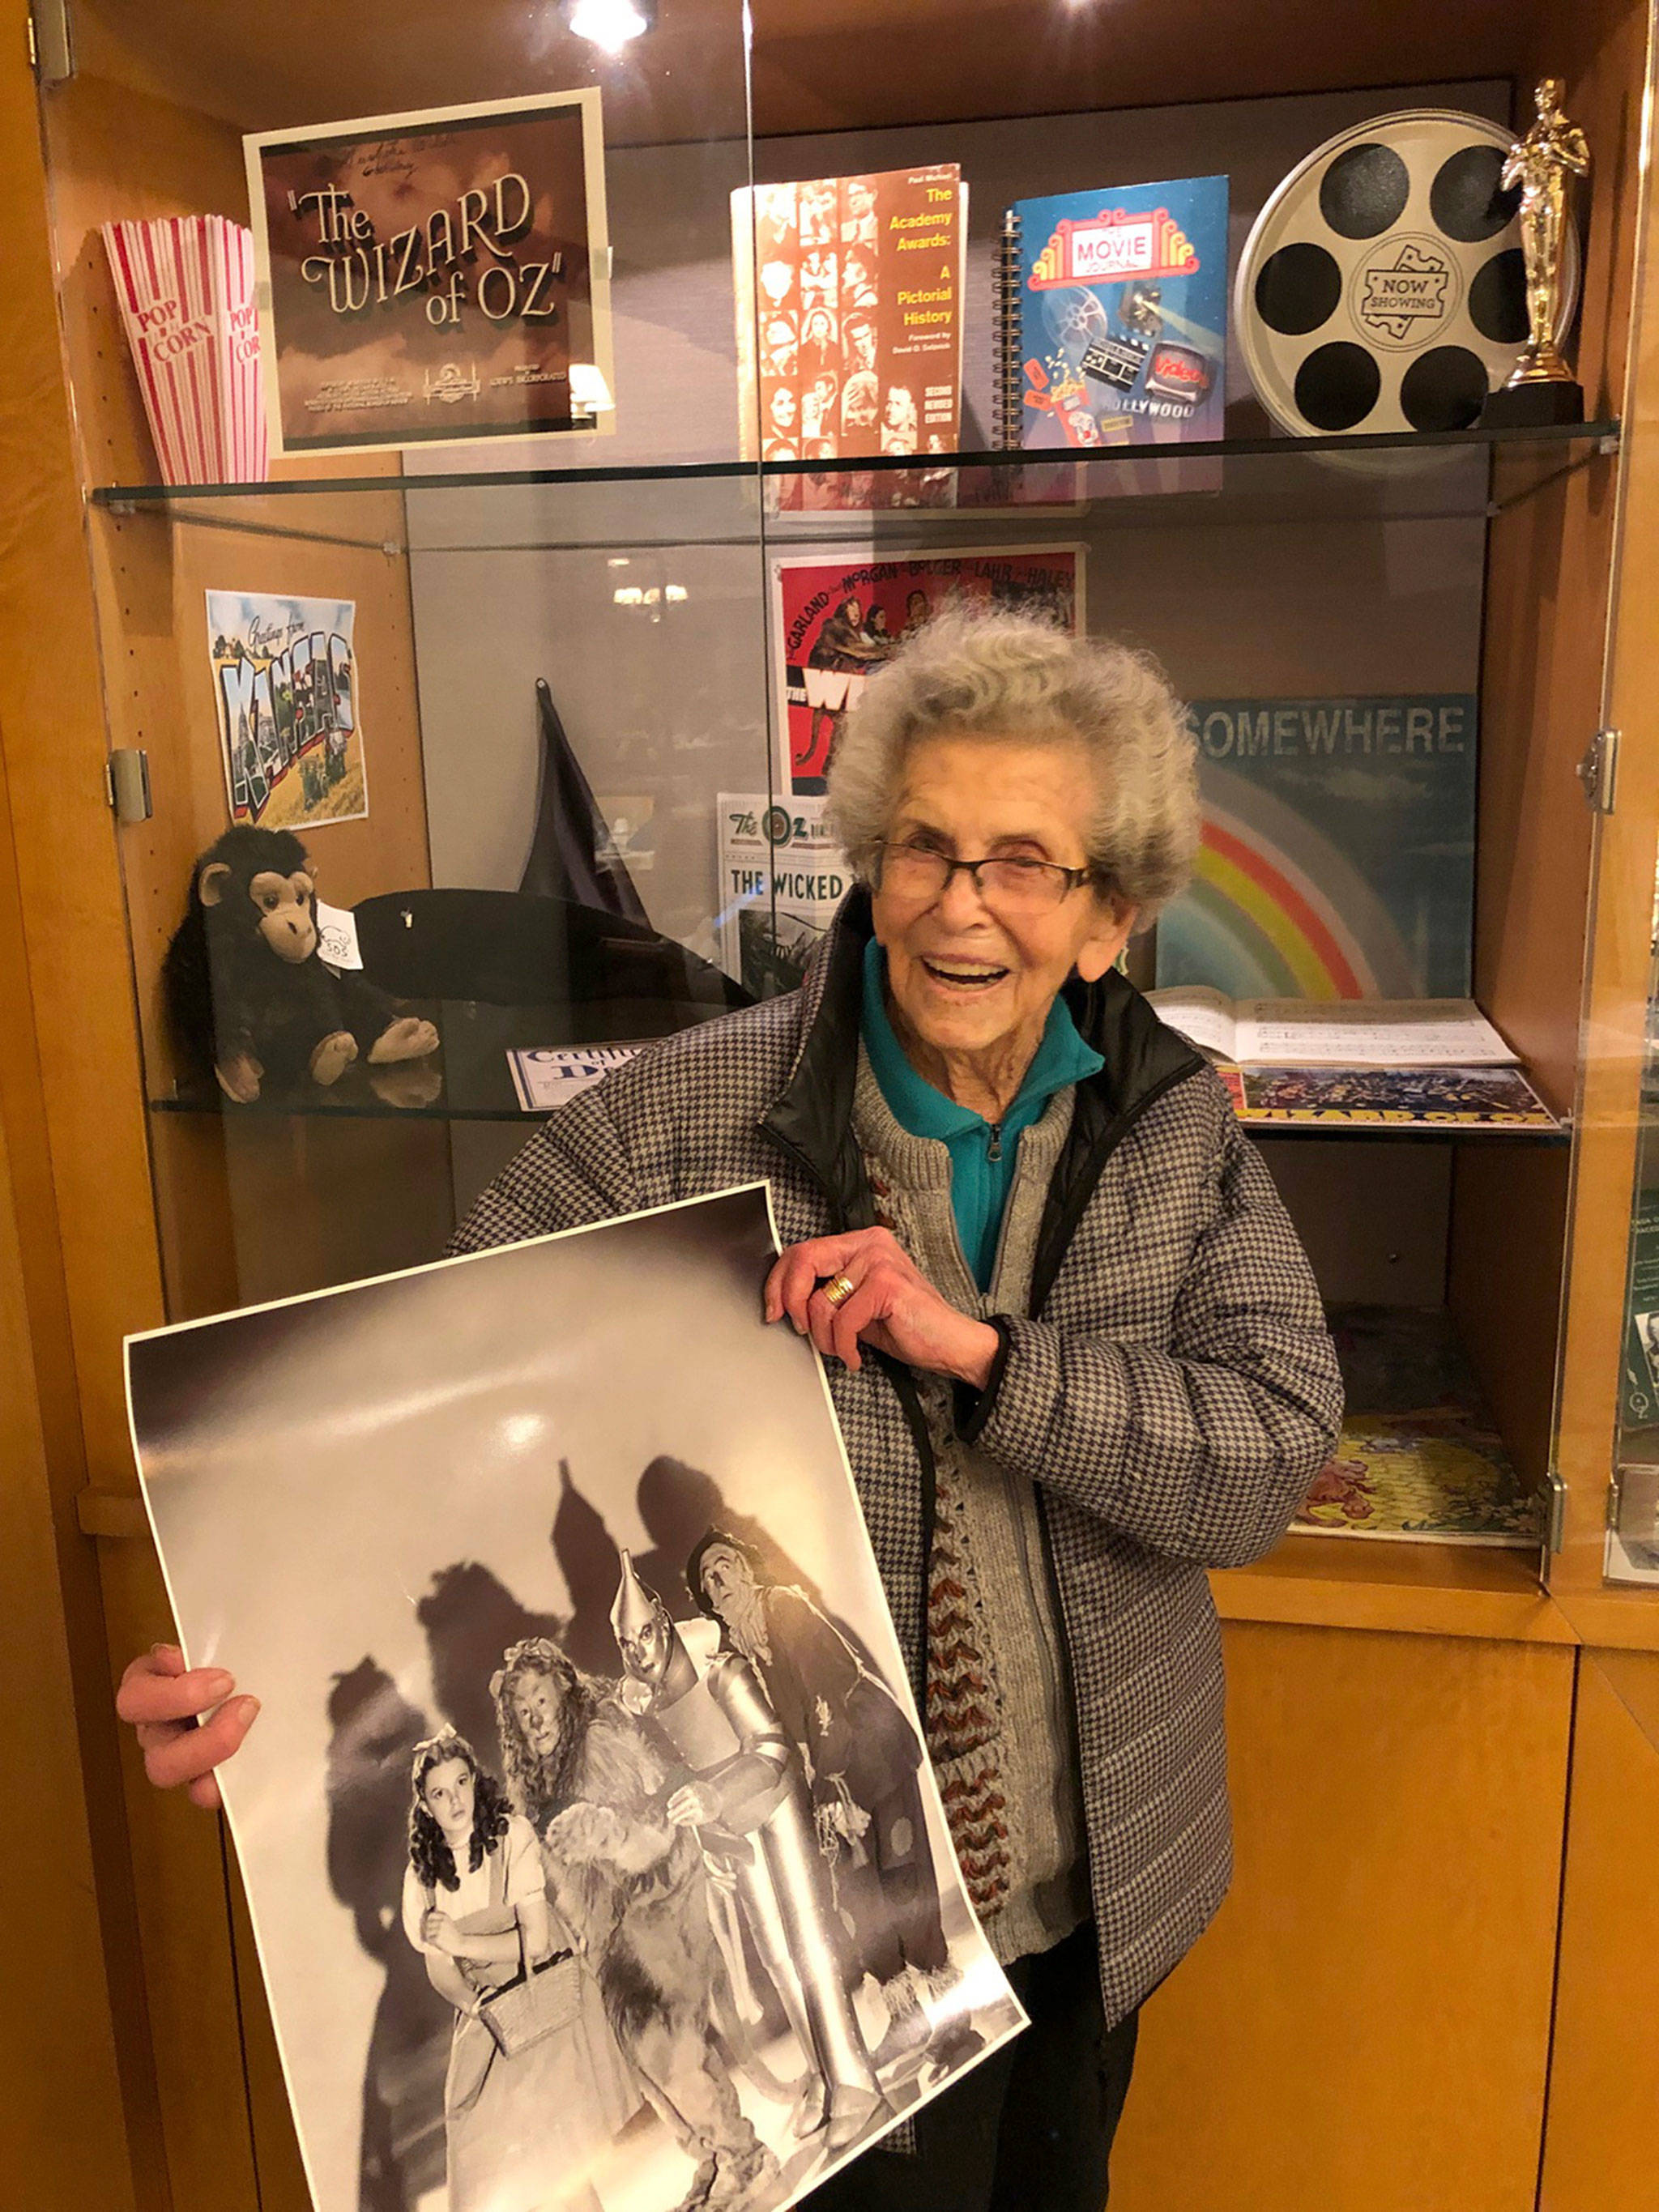 Mercer Island resident Meredythe Glass poses with memorabilia from “The Wizard of Oz” at Covenant Shores. Photo courtesy of Greg Asimakoupoulos